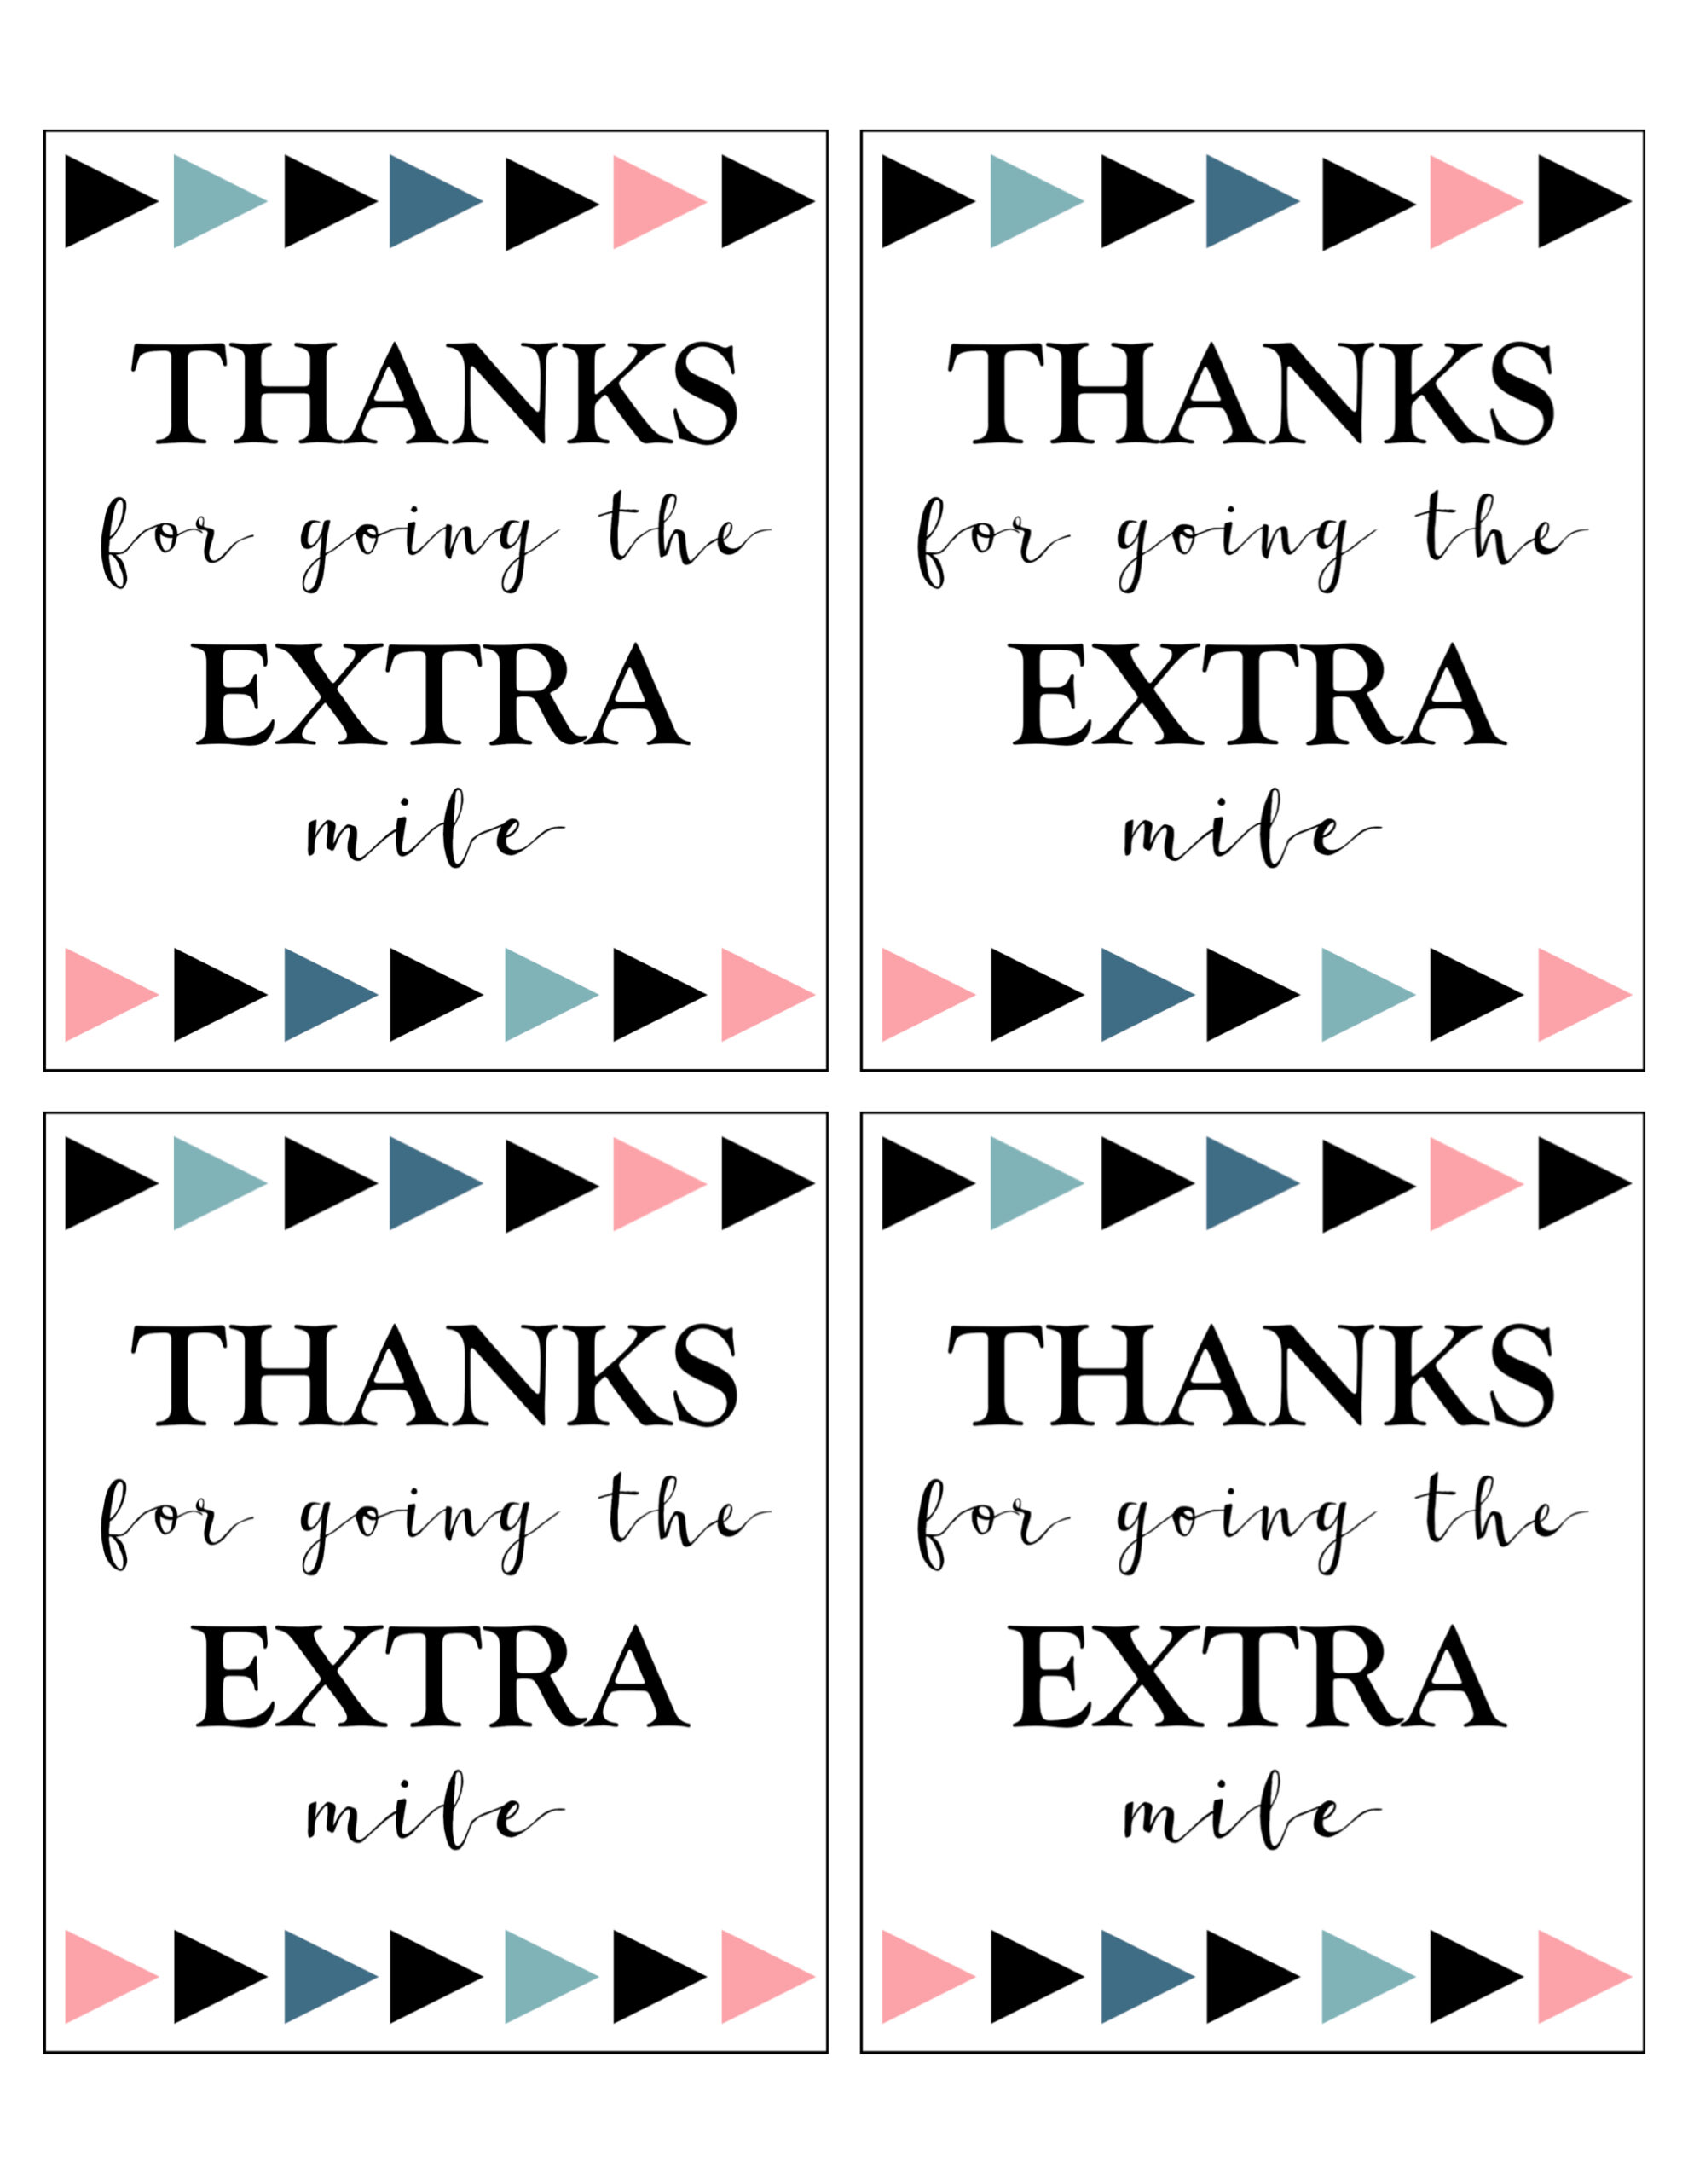 thank-you-for-going-the-extra-mile-printable-printable-word-searches